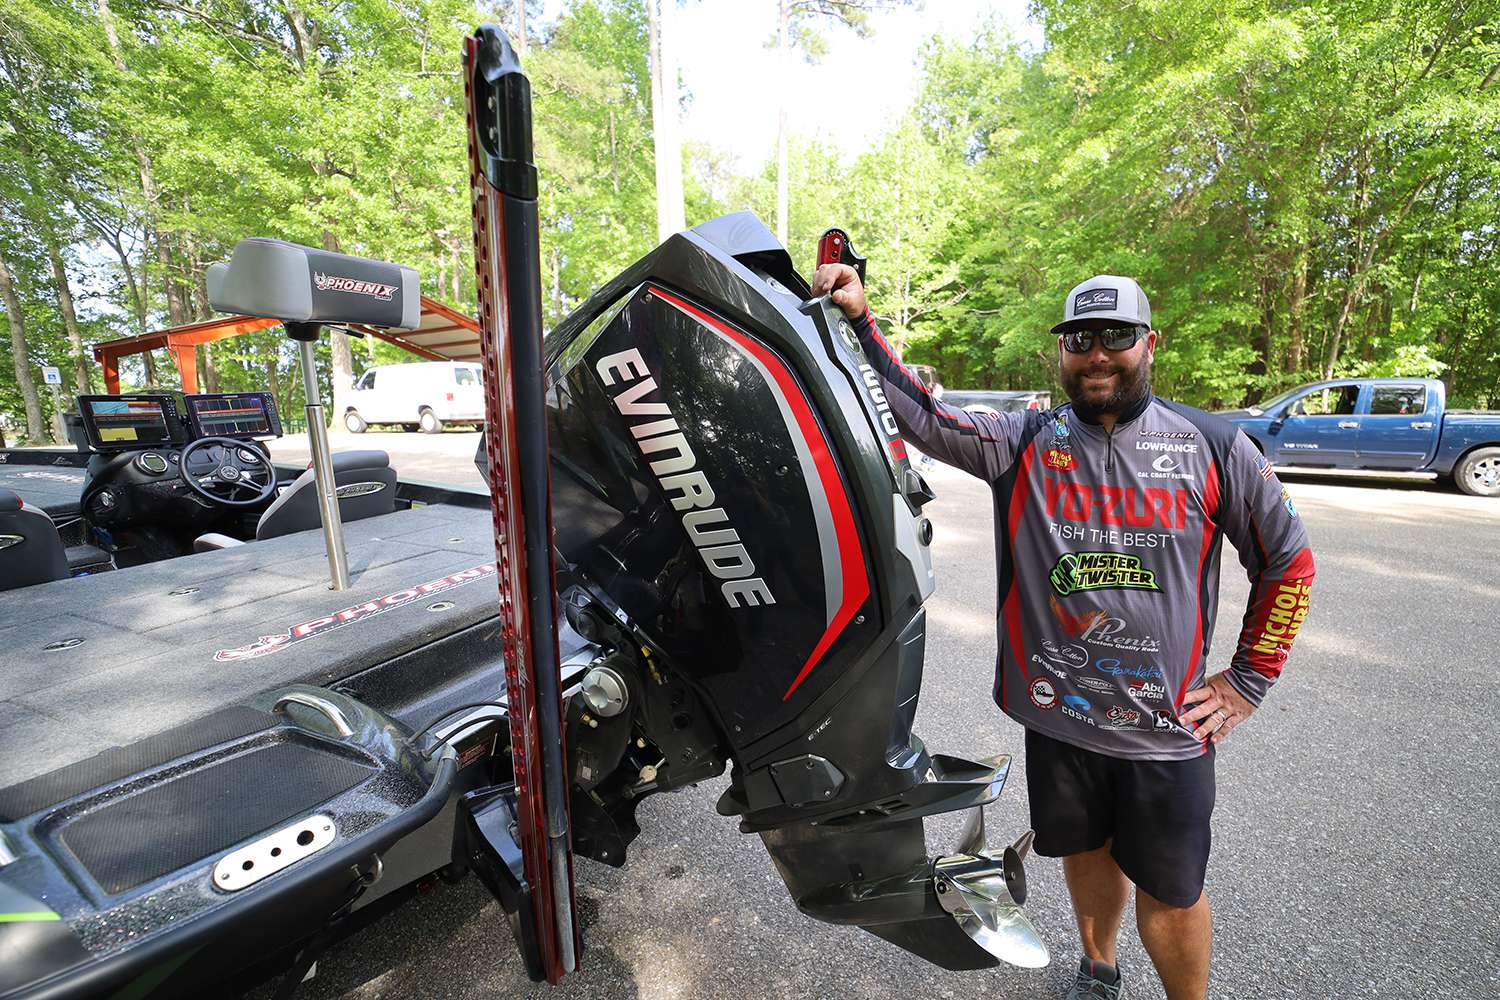 His Phoenix is powered by an Evinrude 250 E-TEC.